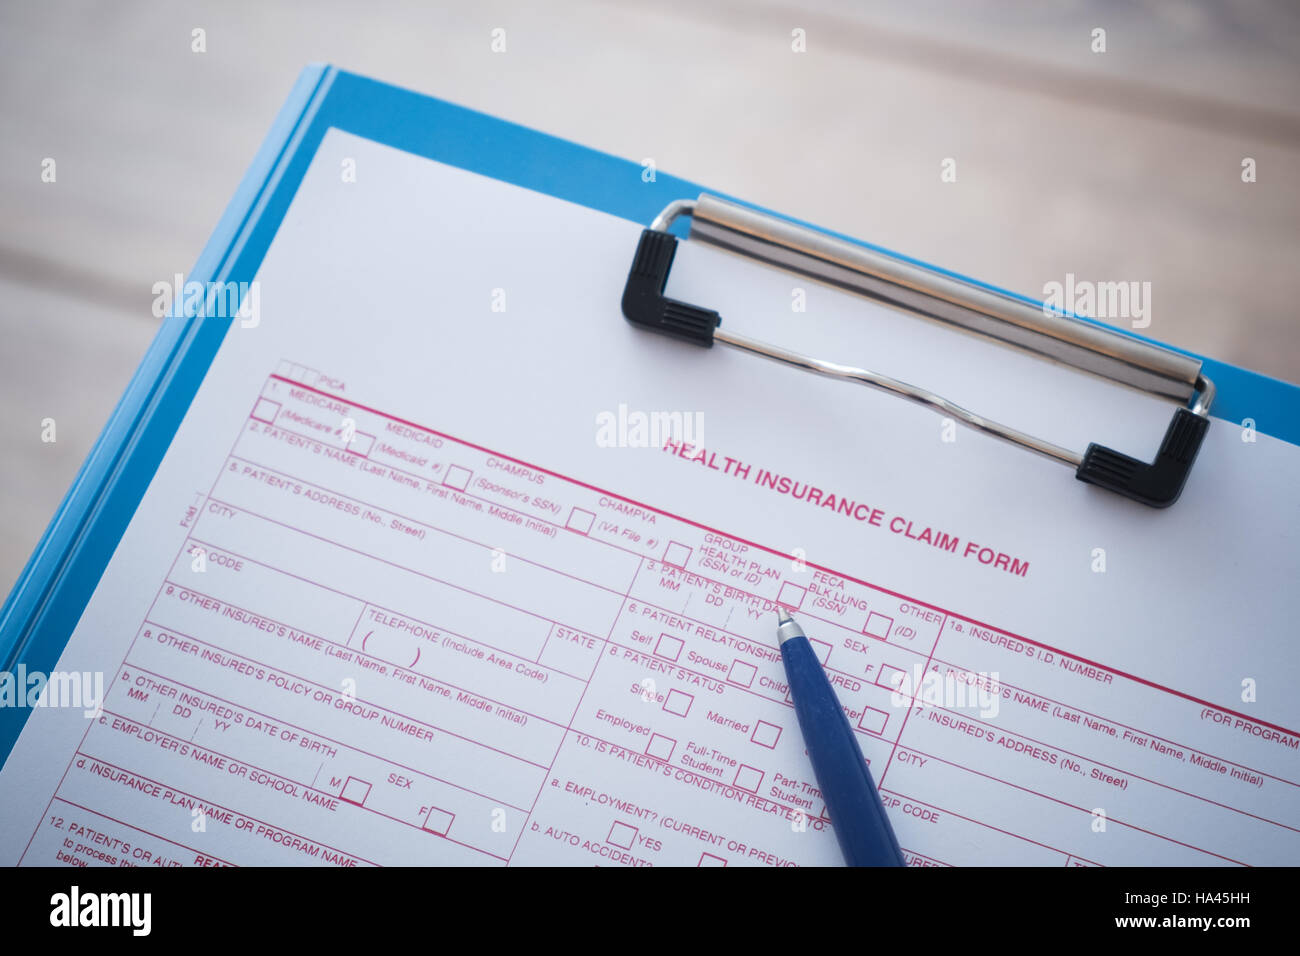 Health insurance claim form with pen Stock Photo